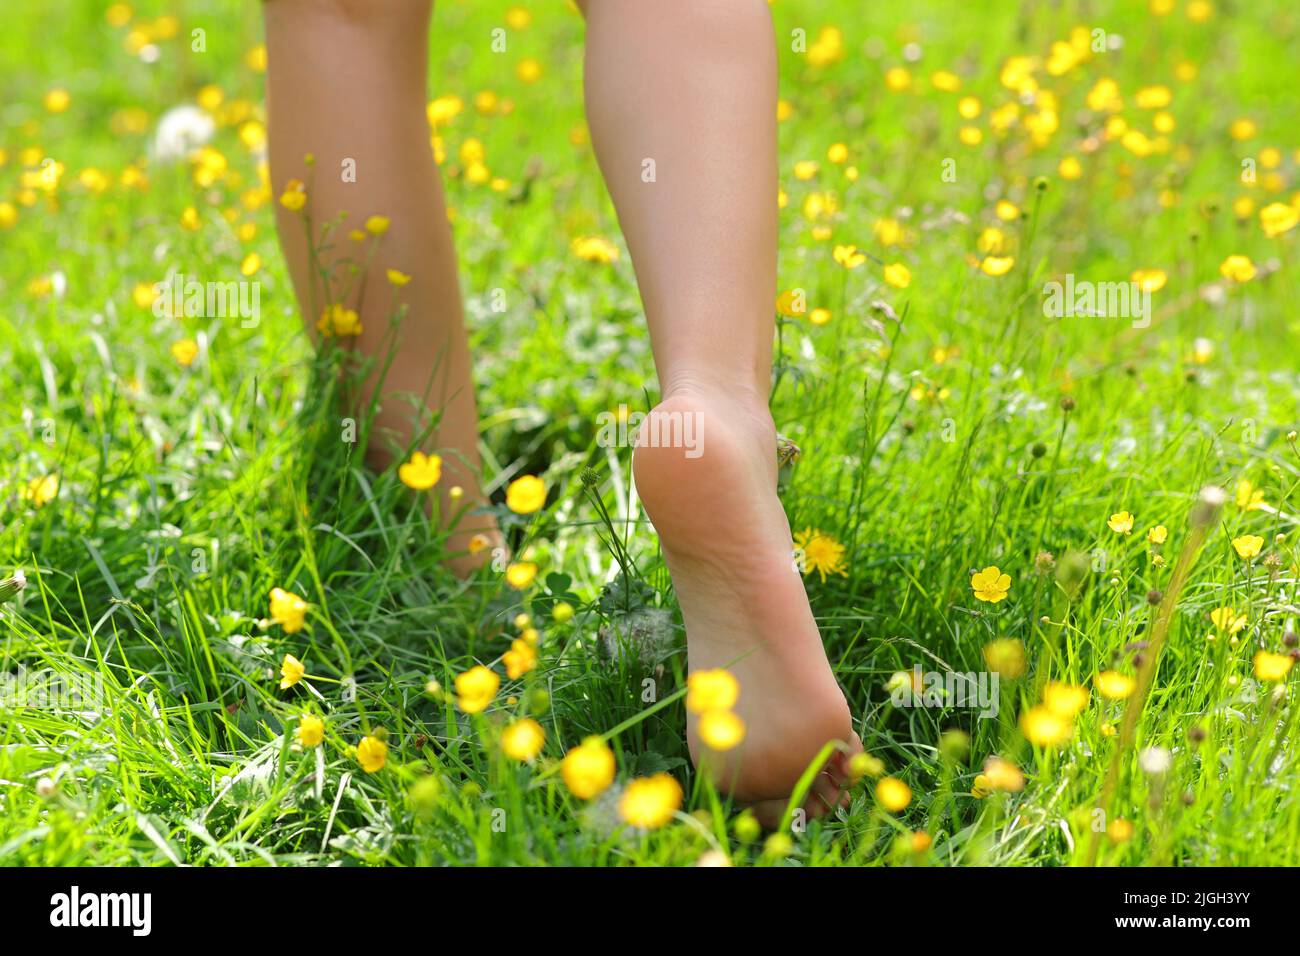 Back view portrait of a woman bare feet walking on the grass Stock Photo